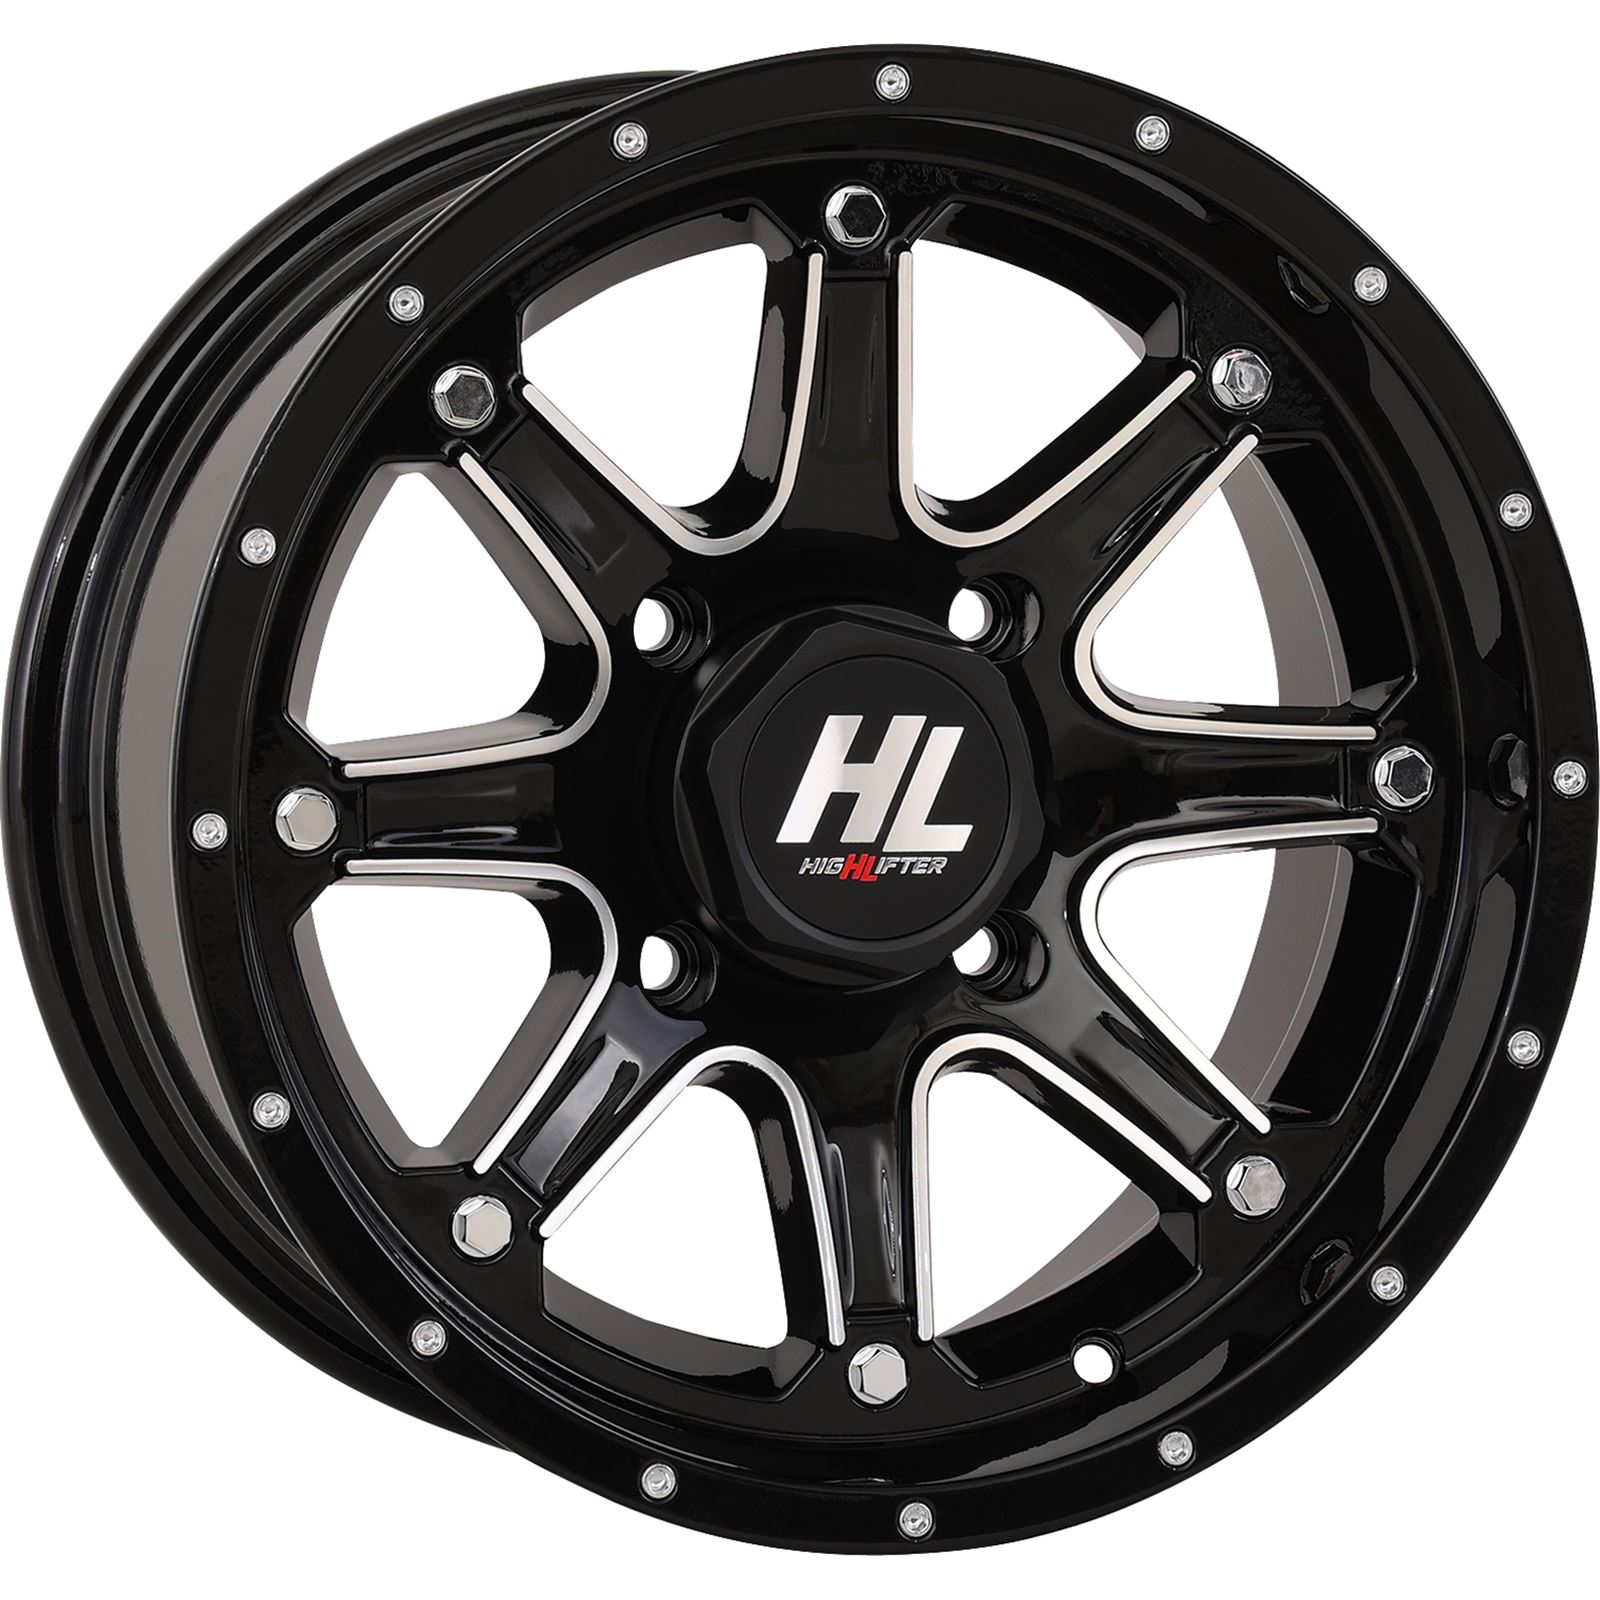 High Lifter Wheel - HL4 - Front/Rear - Gloss Black with Machined - 14x7 - 4/156